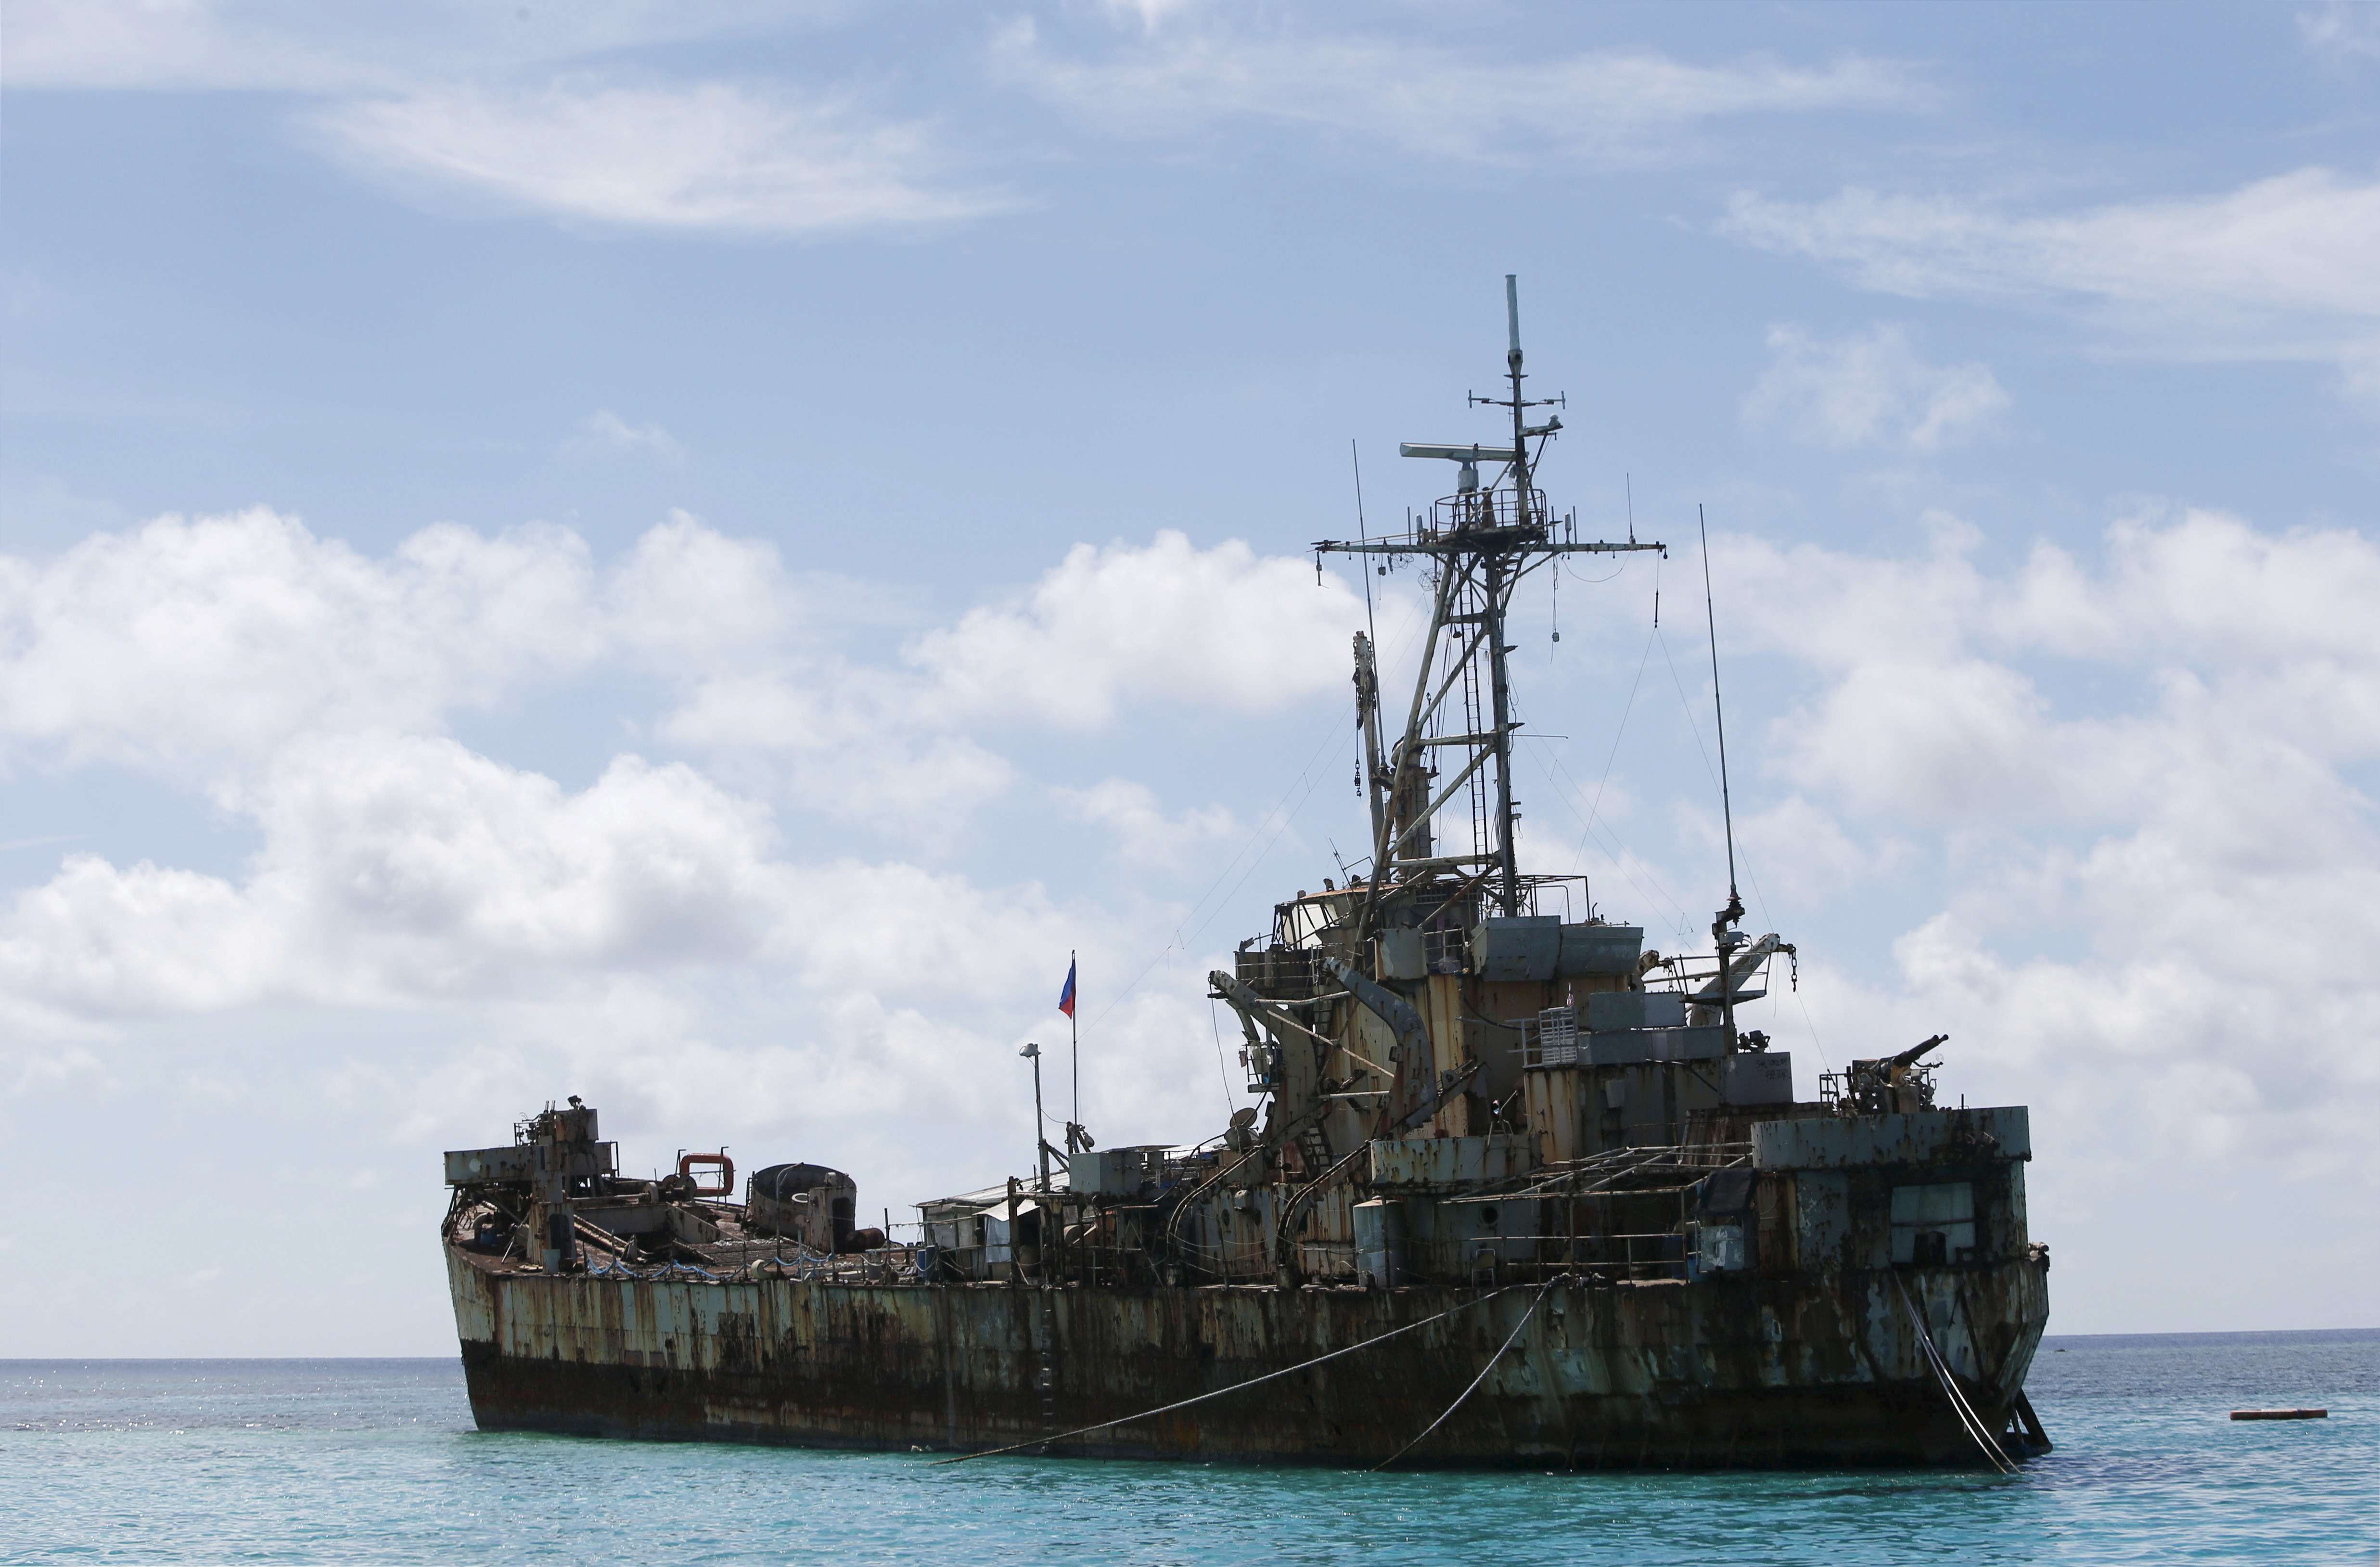 BRP Sierra Madre, a dilapidated Philippine Navy ship that has been aground since 1999 is pictured on the disputed Second Thomas Shoal, part of the Spratly Islands, in the South China Sea